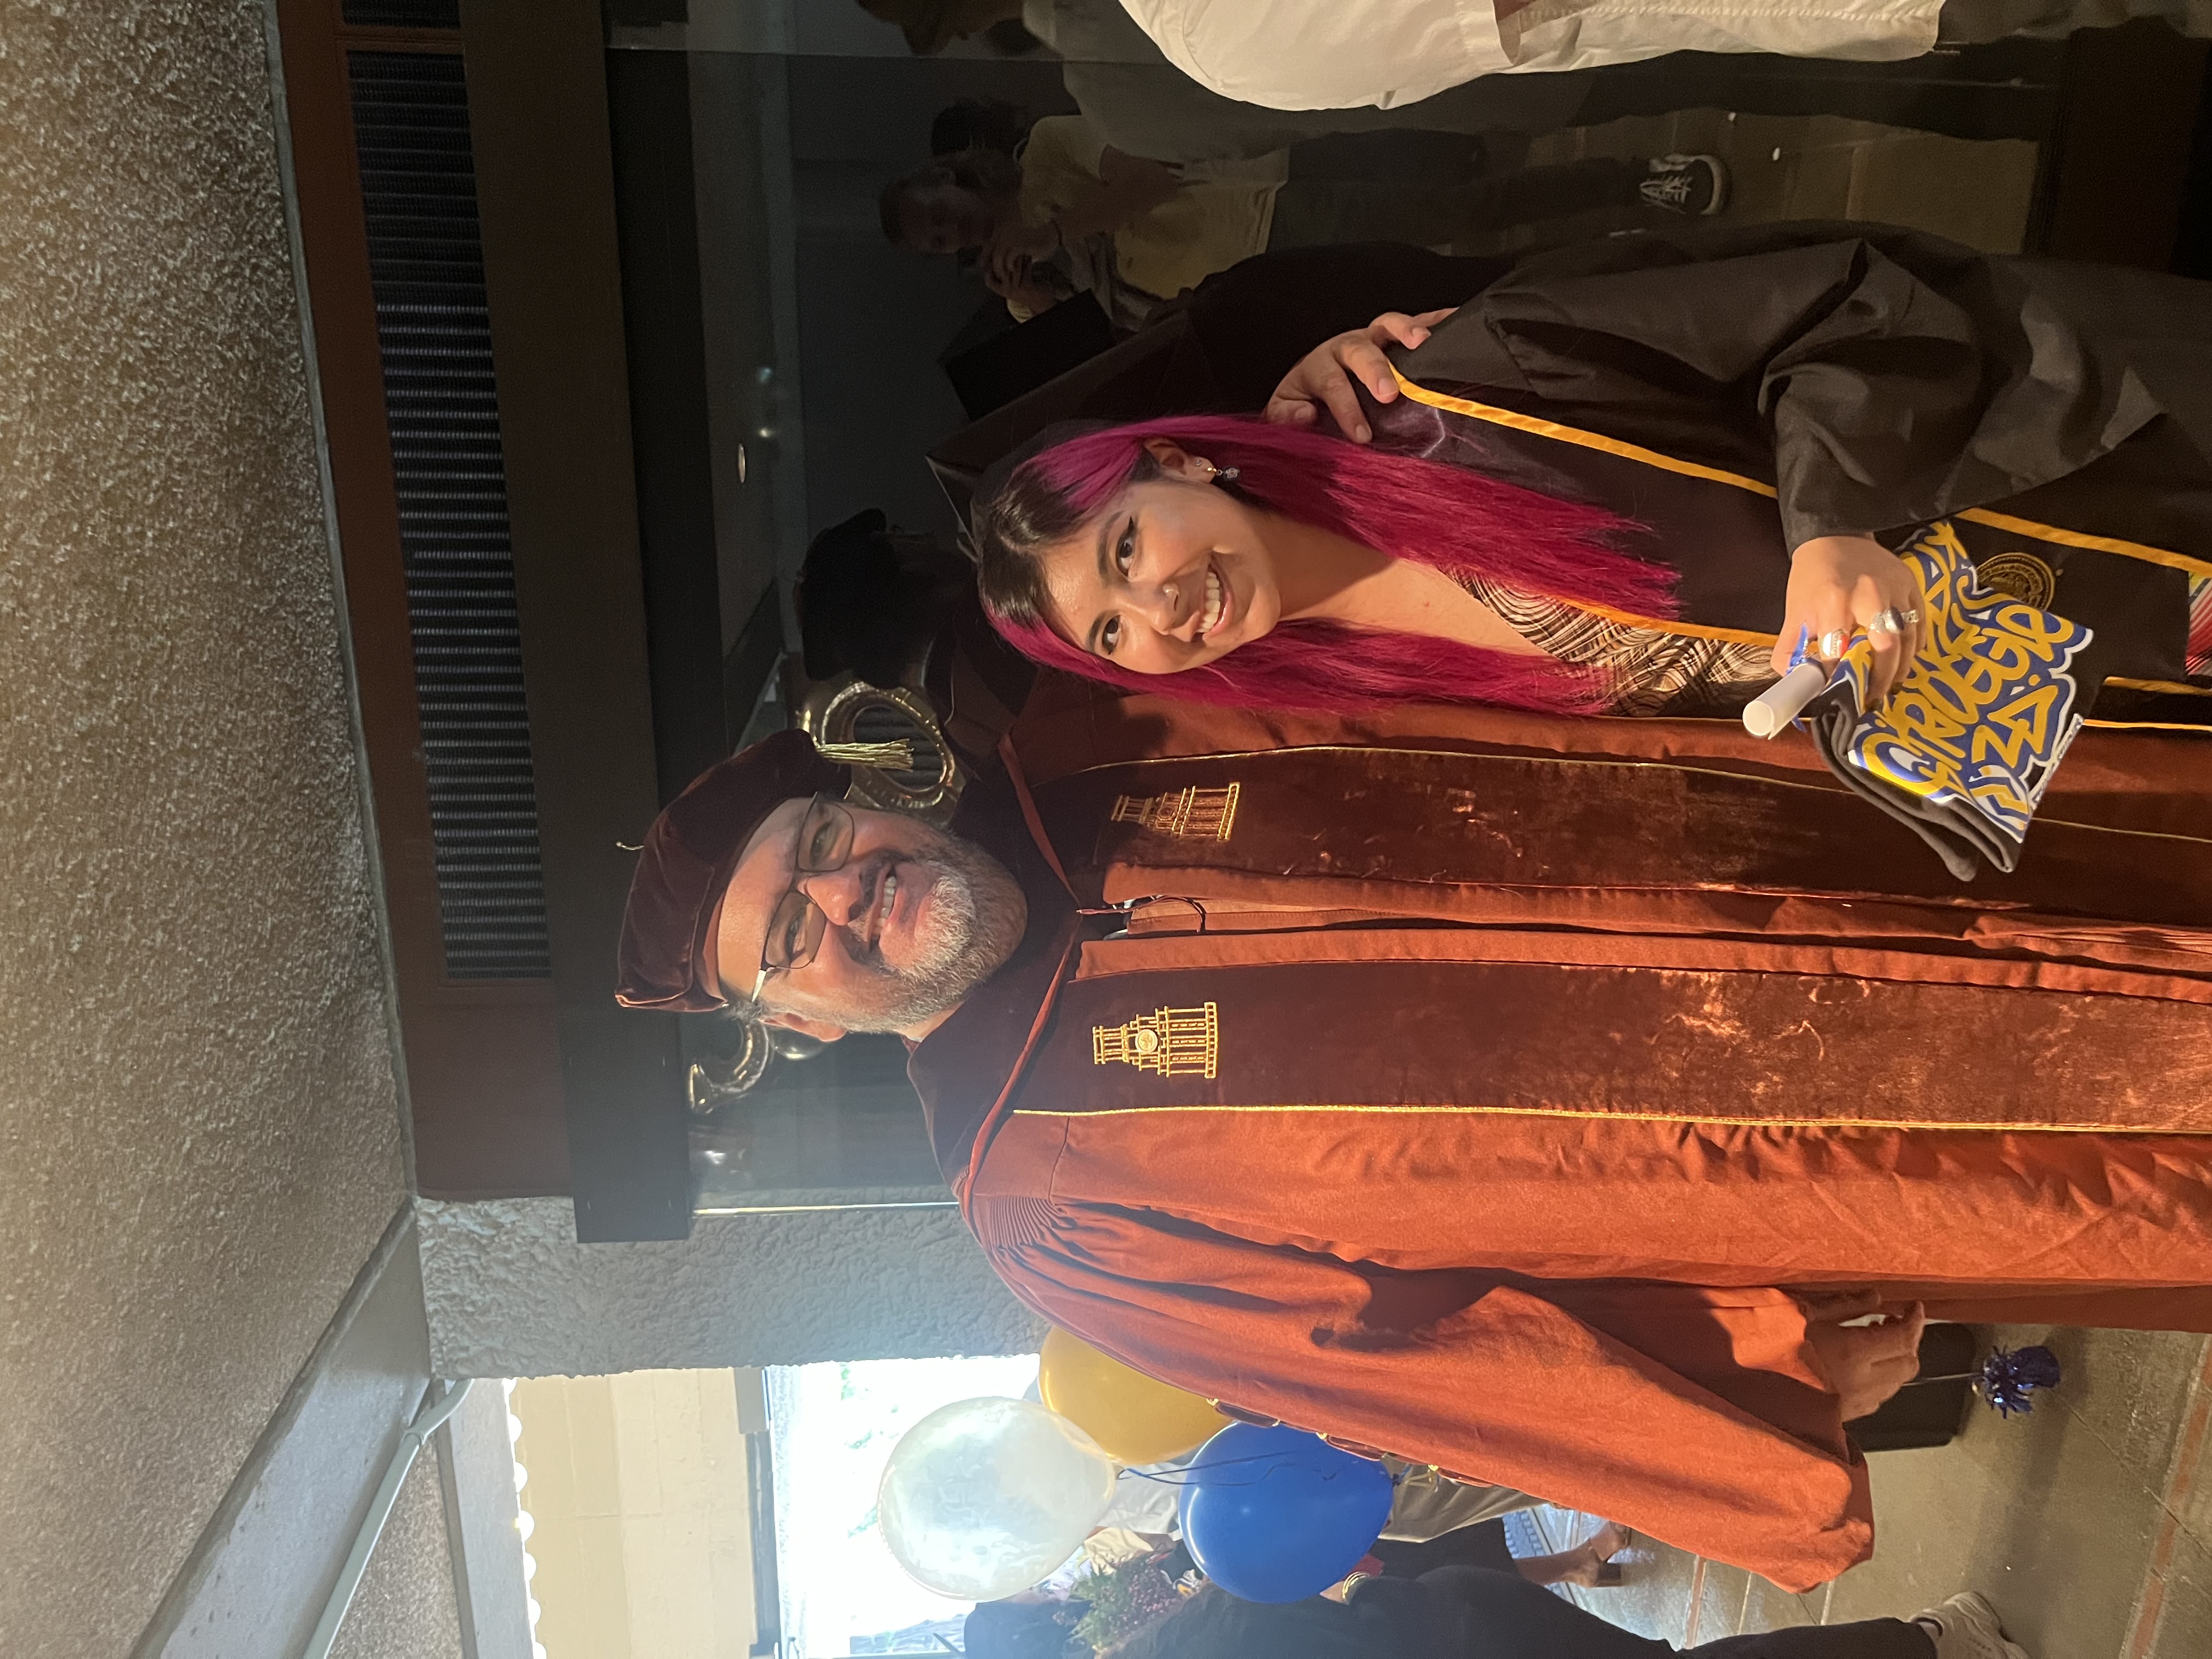 Pablo Gonzalez wearing a faculty graduation robe standing next to Ceclie Lopez during her graduation.